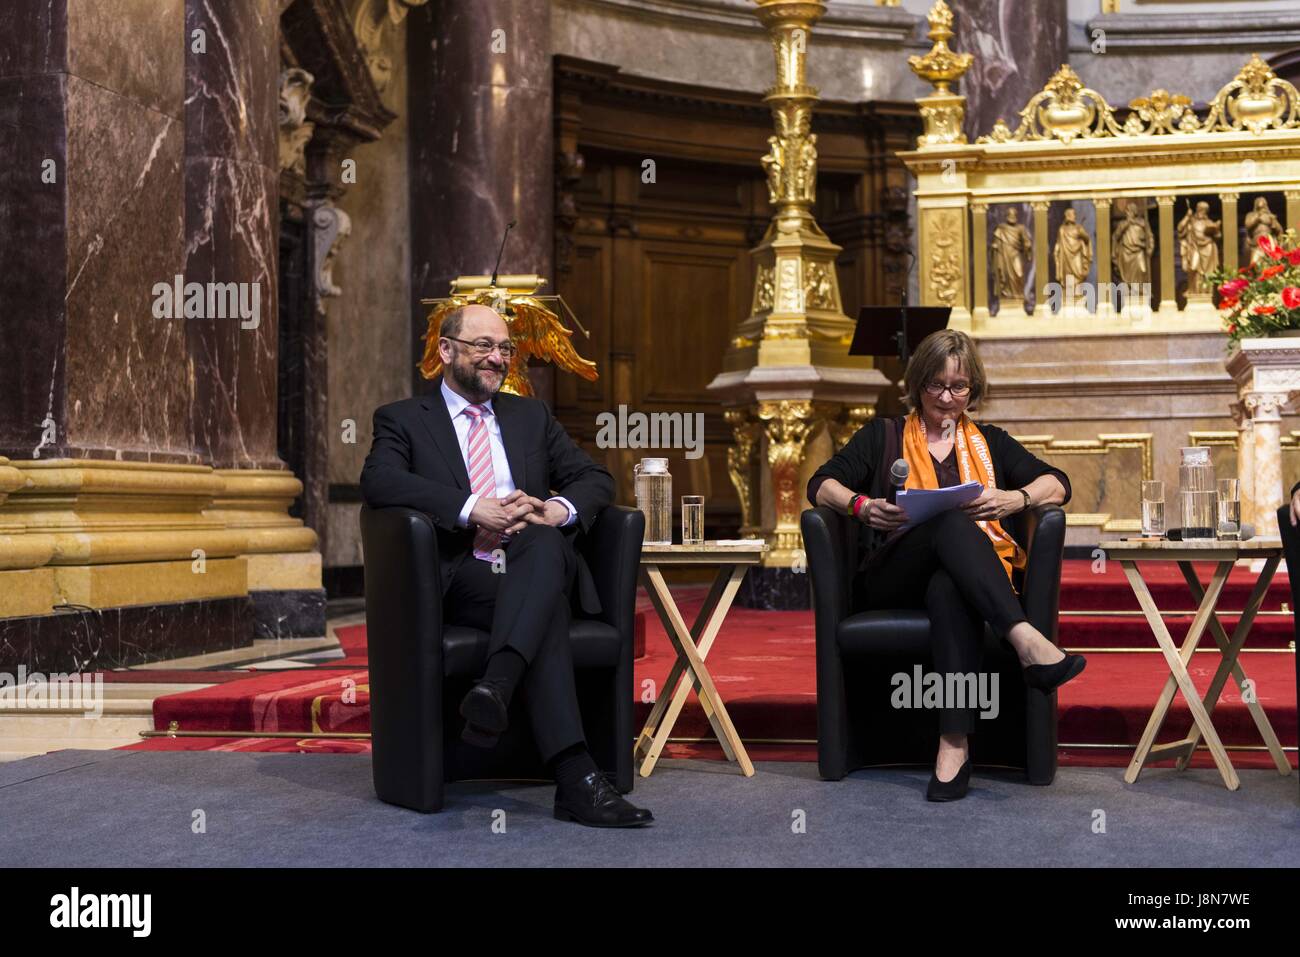 Berlin, Berlin, Germany. 26th May, 2017. MARTIN SCHULZ, candidate for the German Chancellorship and chairman of the Social Democratic Party of Germany (SPD) and former President of the European Parliament, in Berlin Cathedral during the 36th German Protestant Church Congress which take place in Berlin and Wittenberg from 24 to 28 May 2017 under the slogan 'You see me' [German: 'Du siehst mich' Credit: Jan Scheunert/ZUMA Wire/Alamy Live News Stock Photo